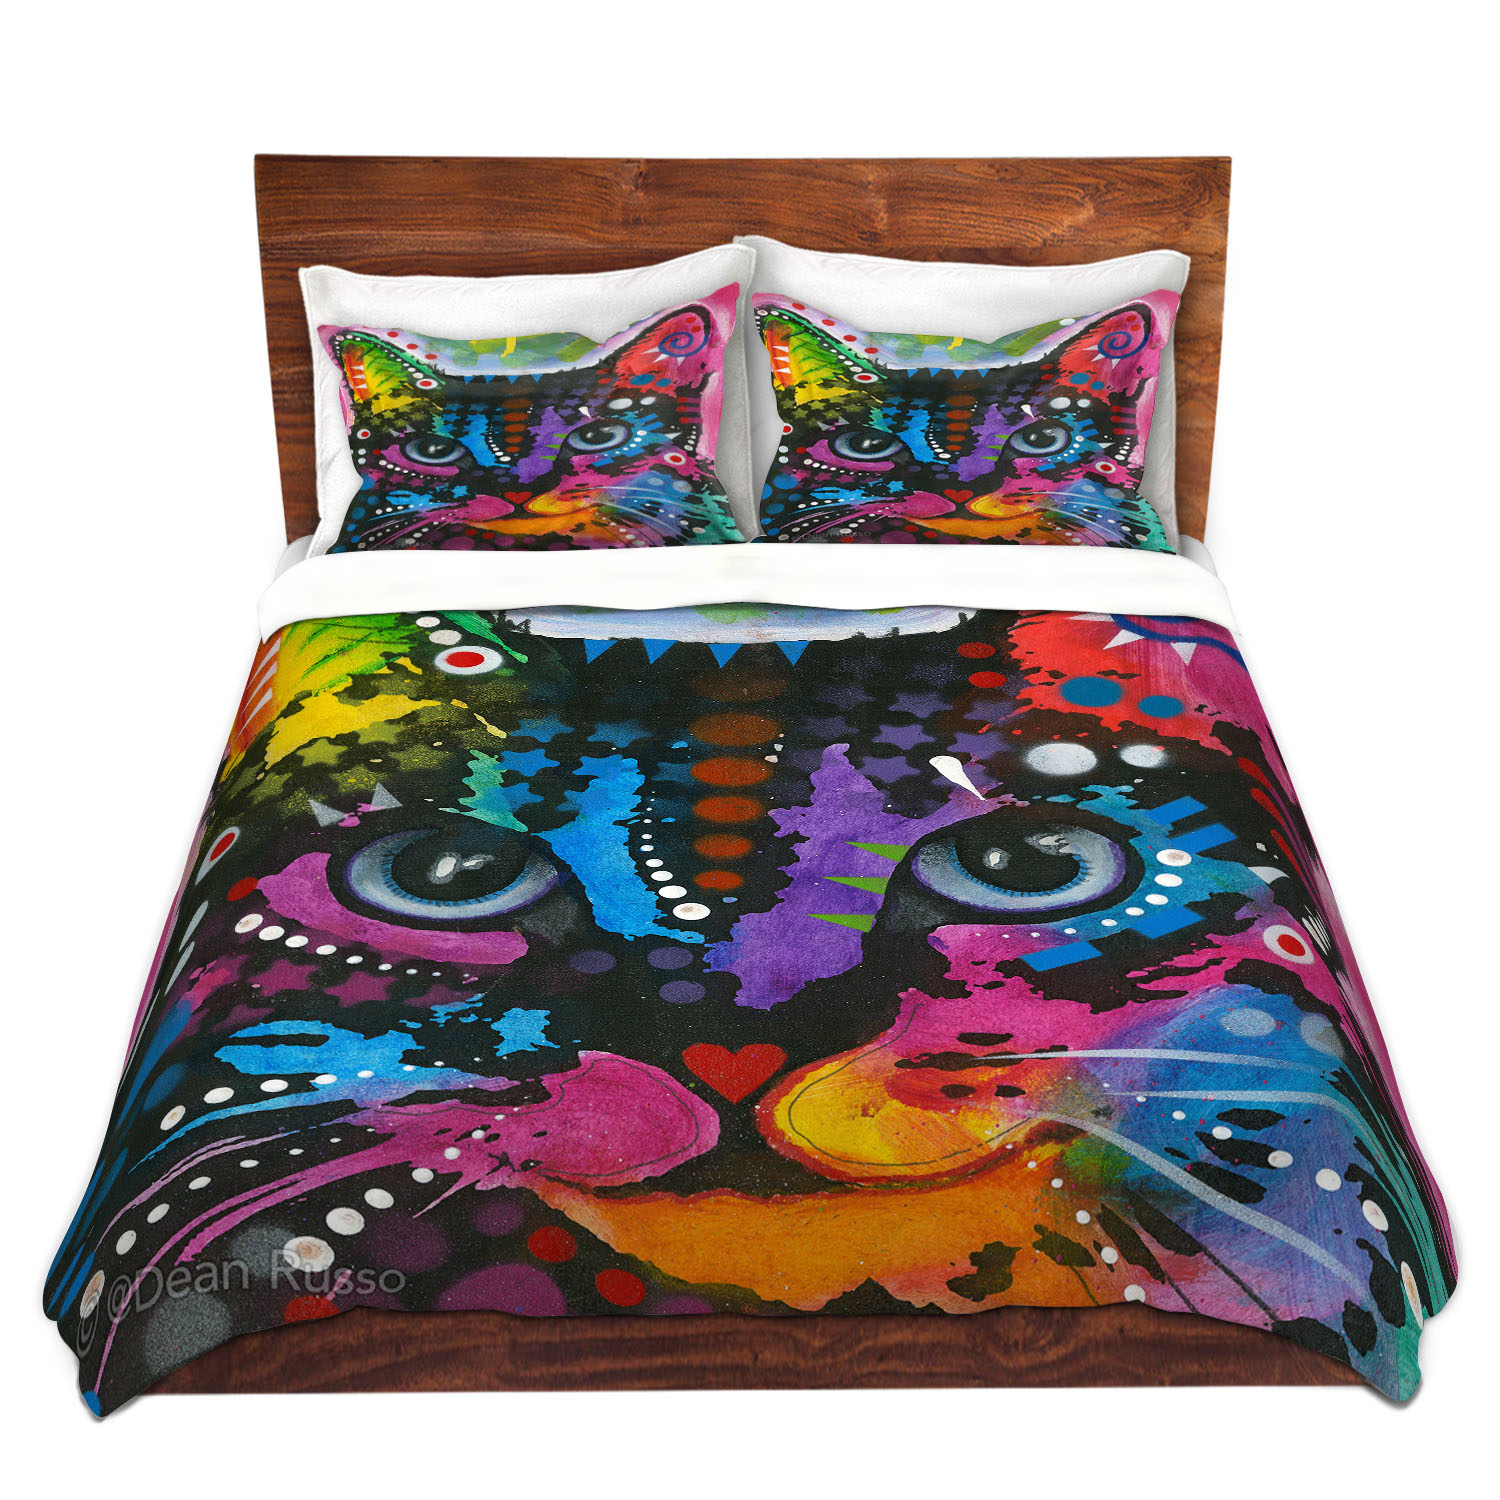 Dianoche Microfiber Duvet Covers By Dean Russo - Cat 12